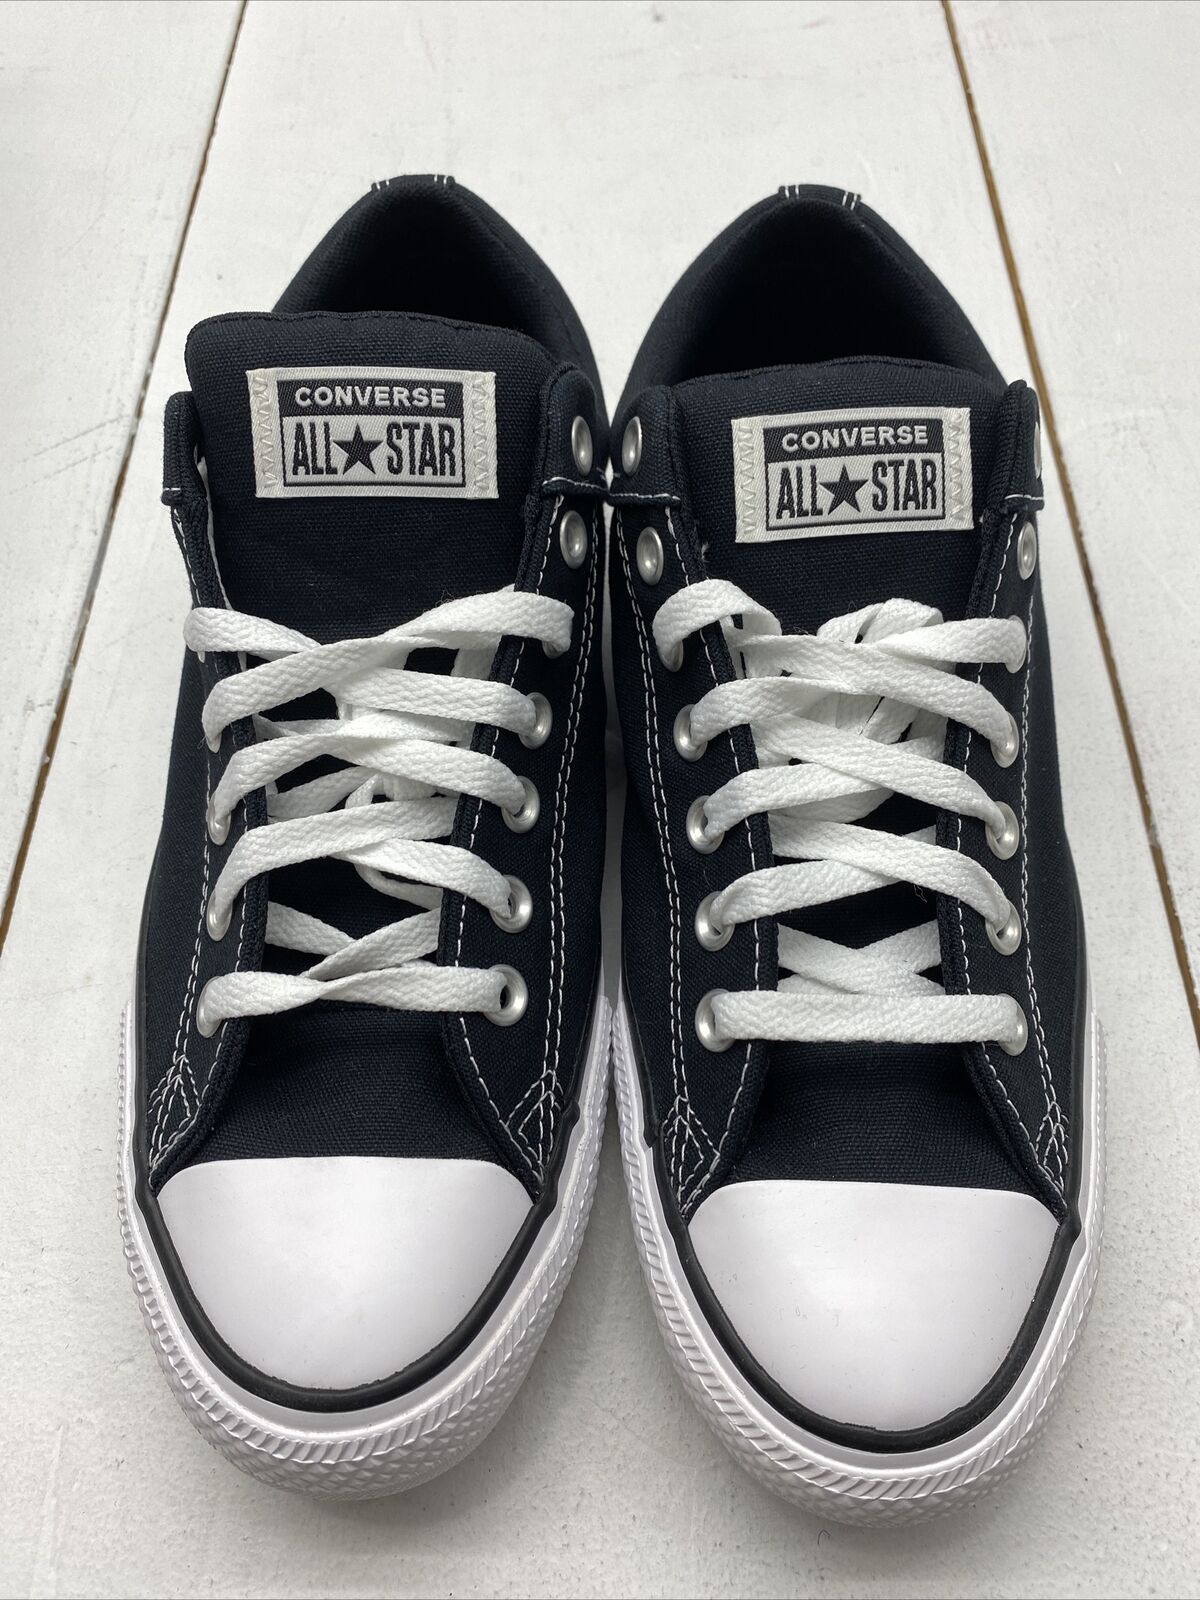 Mens Sneakers | Shop Converse Sneakers for Men | CONVERSE SOUTH AFRICA